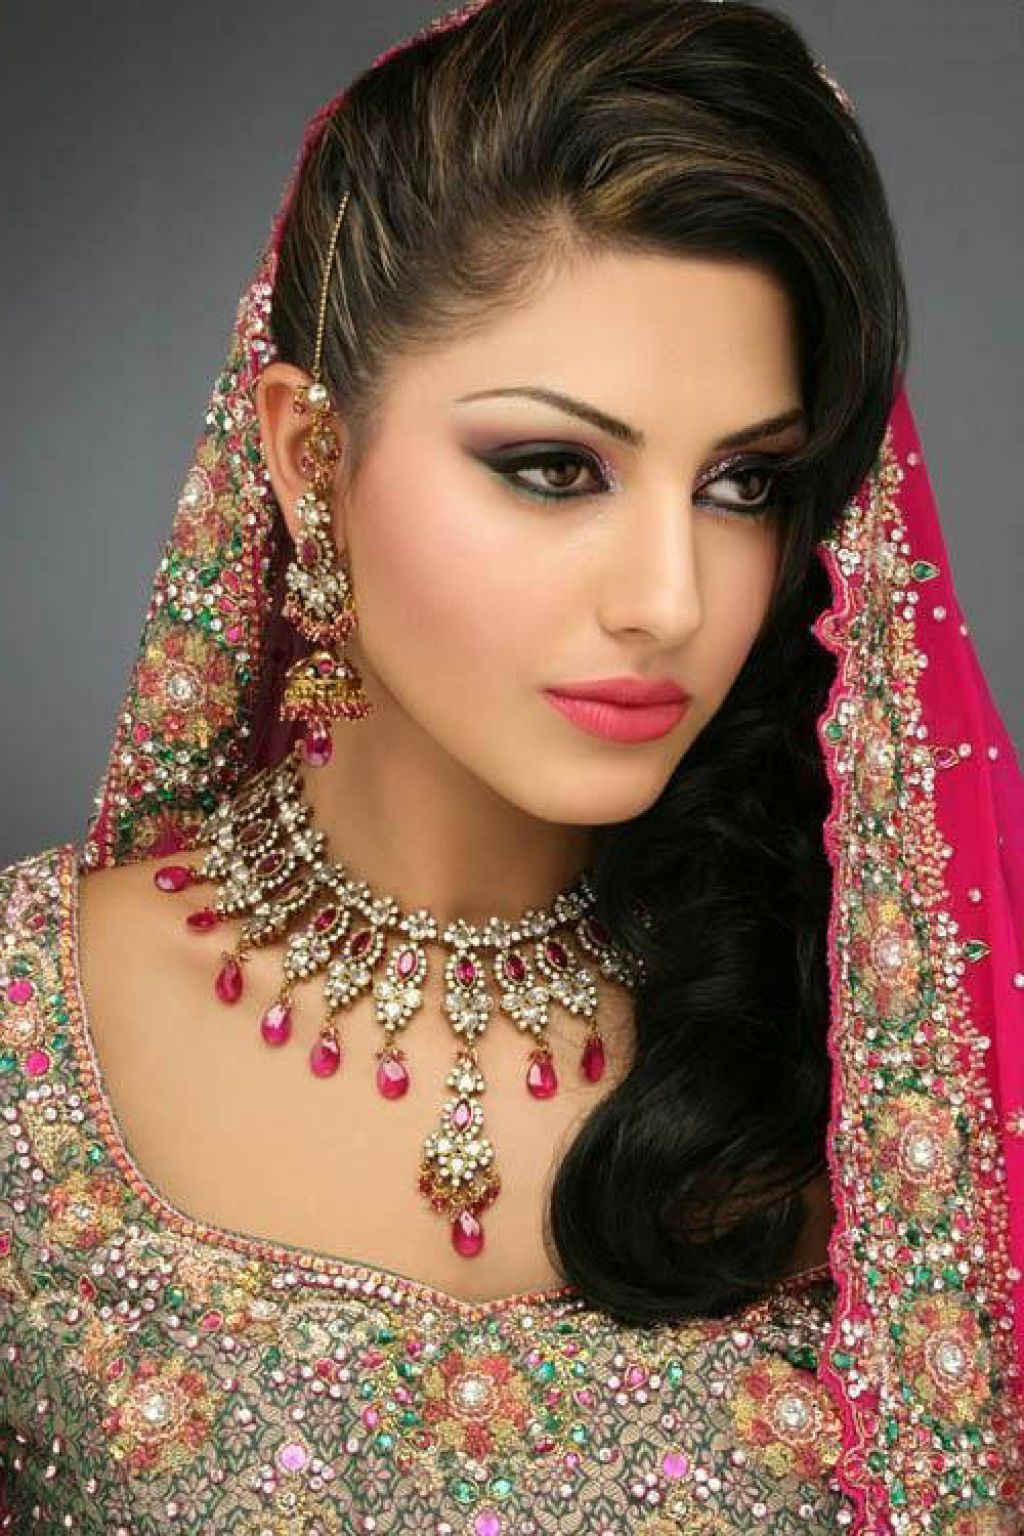 Indian Wedding Hairstyles For Short Hair
 Top 10 most Beautiful Indian Wedding Bridal Hairstyles for